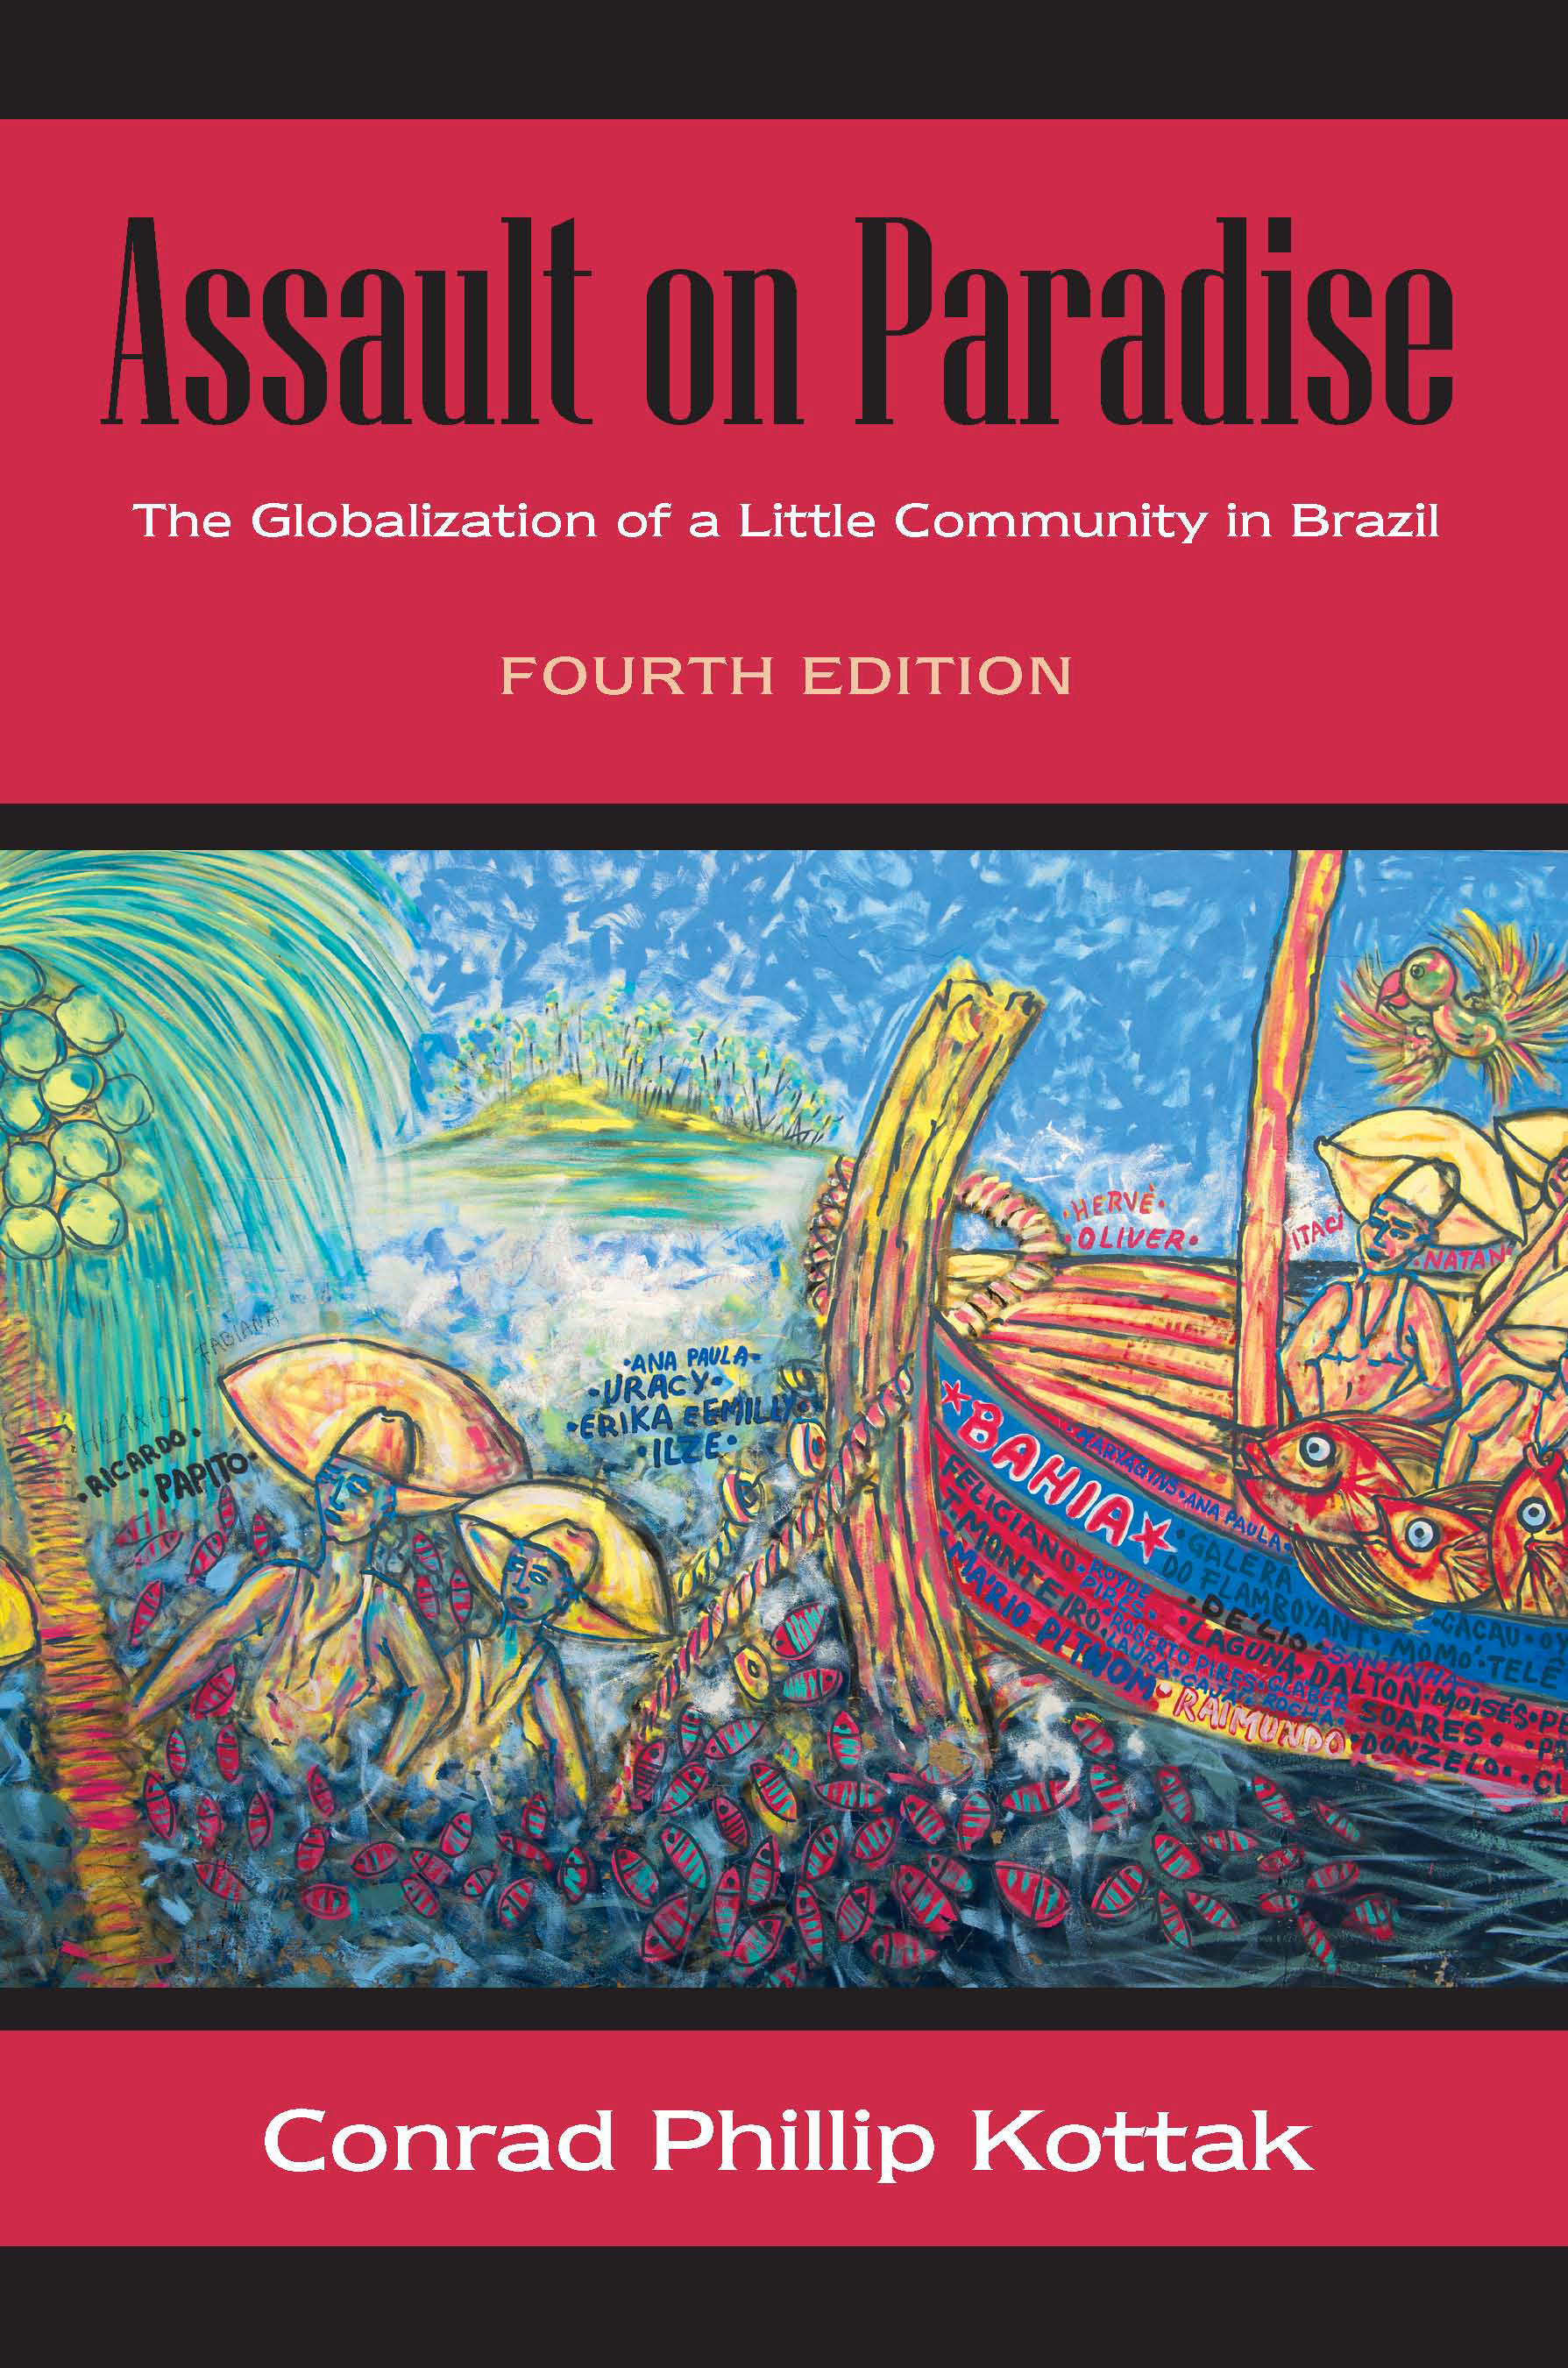 Assault on Paradise: The Globalization of a Little Community in Brazil, Fourth Edition by Conrad Phillip Kottak